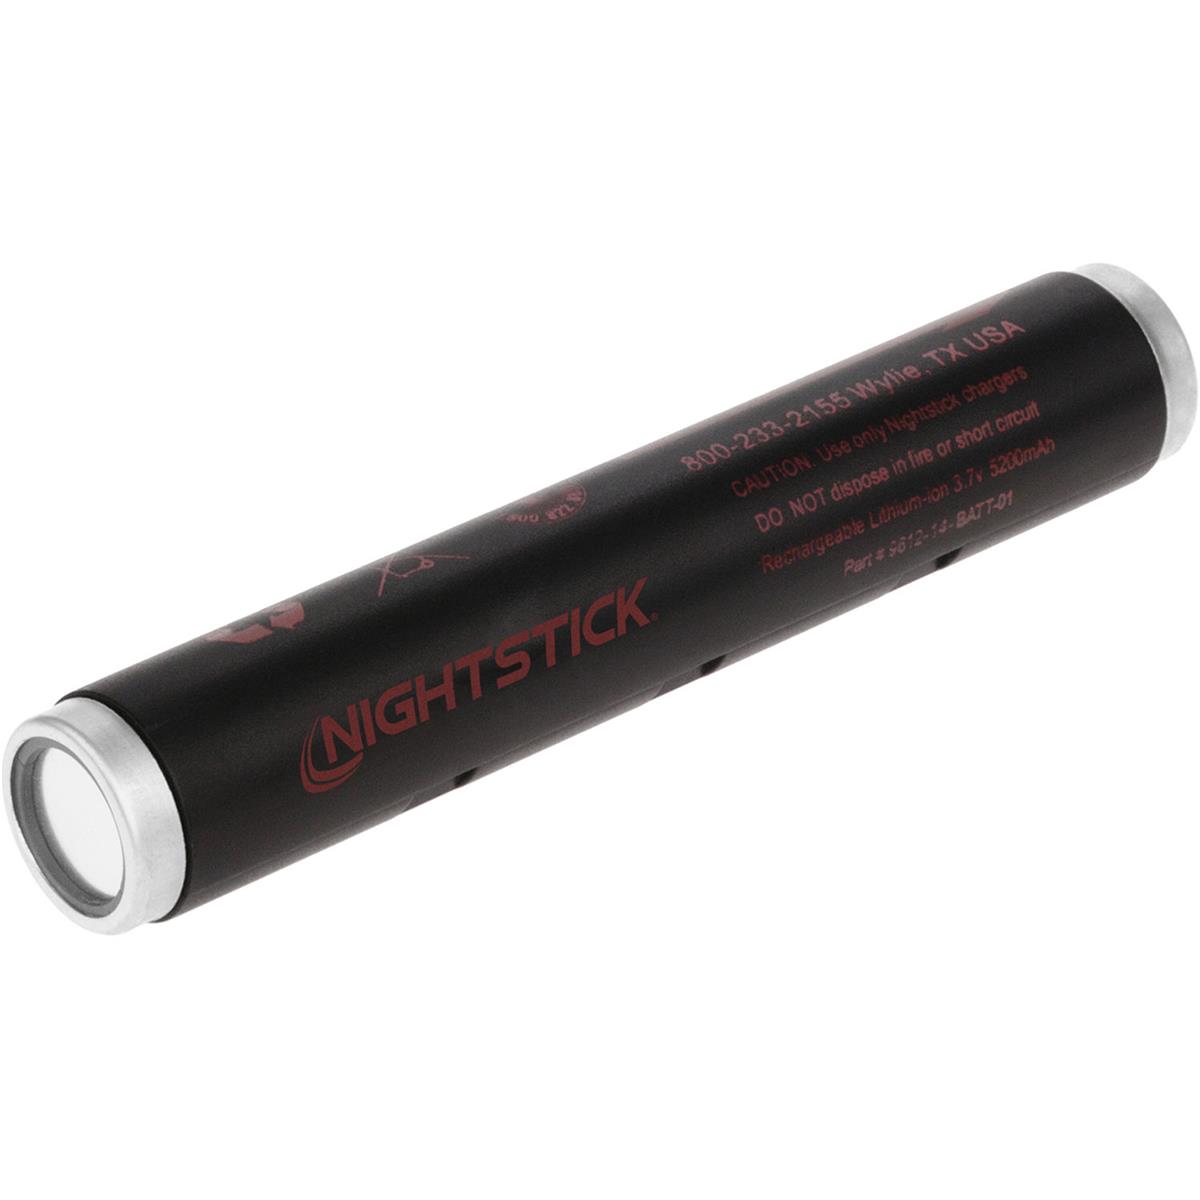 Image of Nightstick Rechargeable Lithium-Ion Battery for 5580 Series